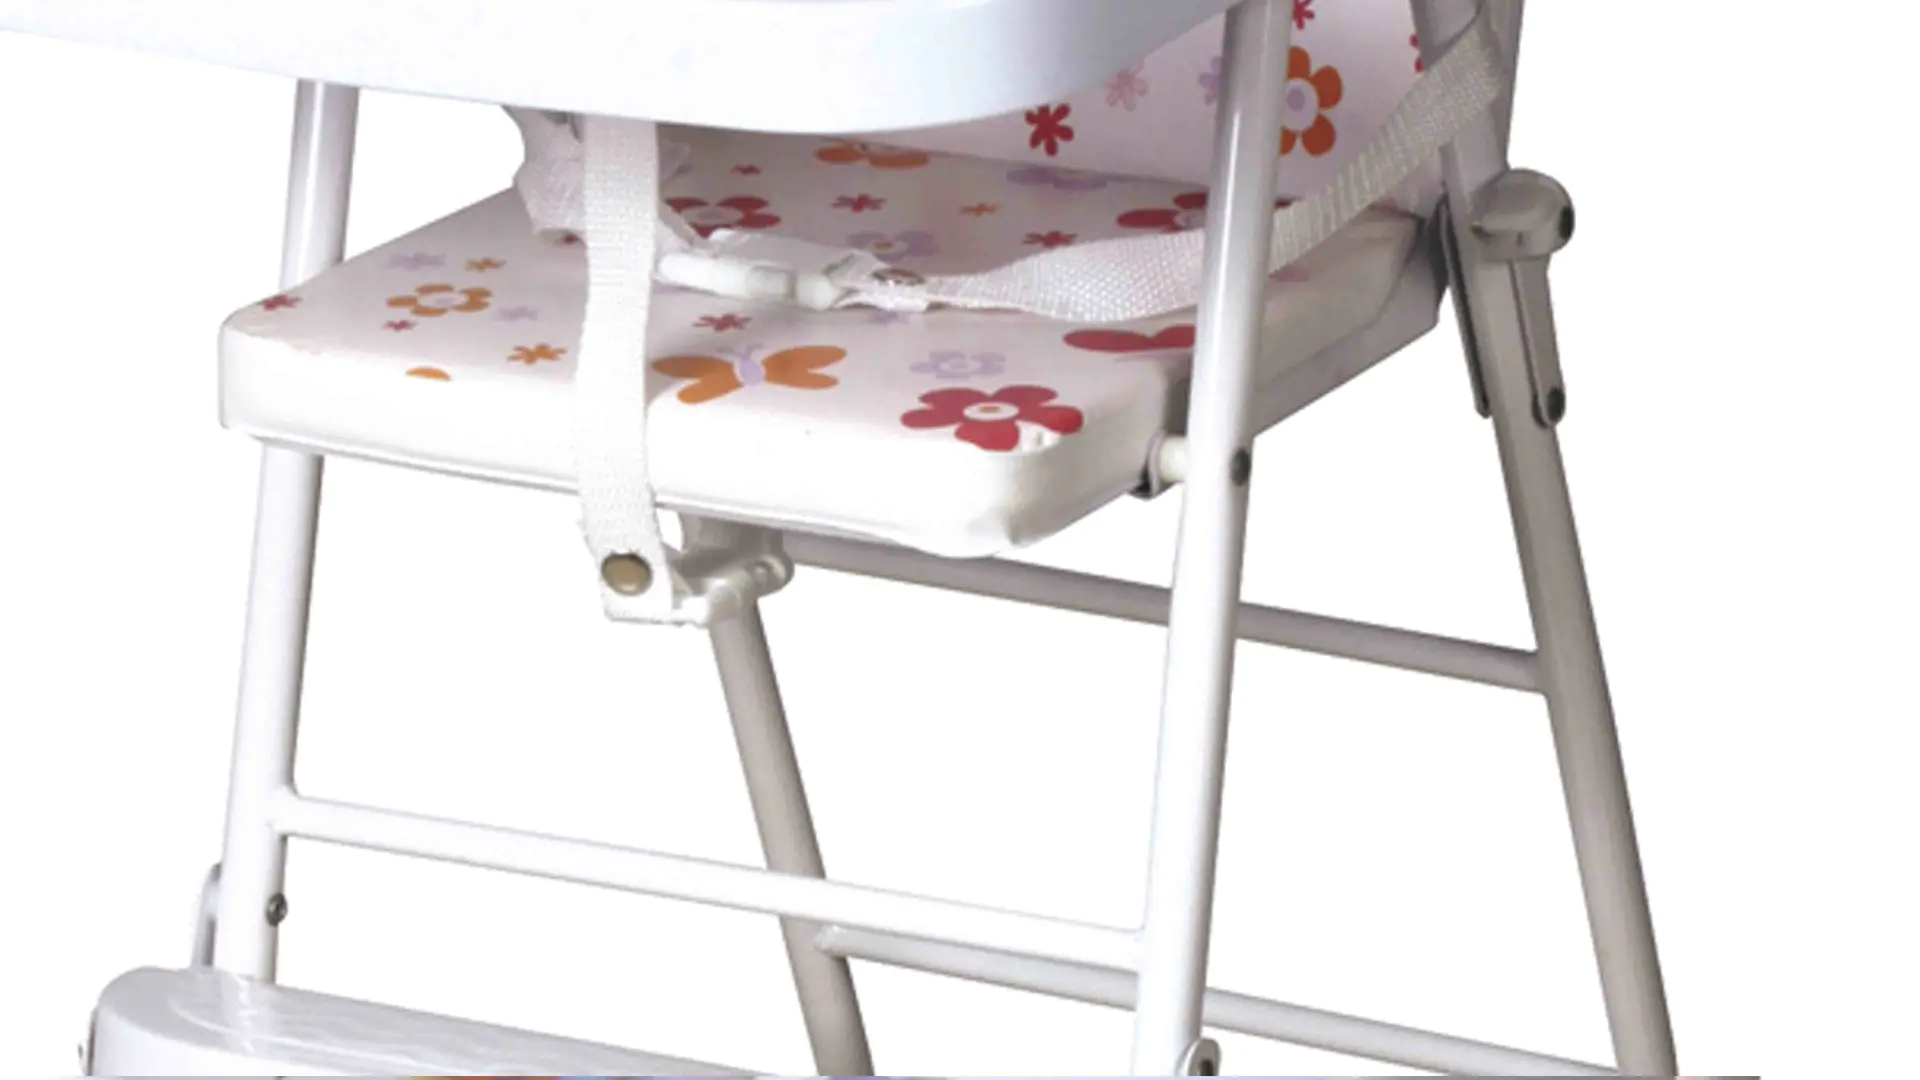 Portable and foldable high chair for baby eating 303